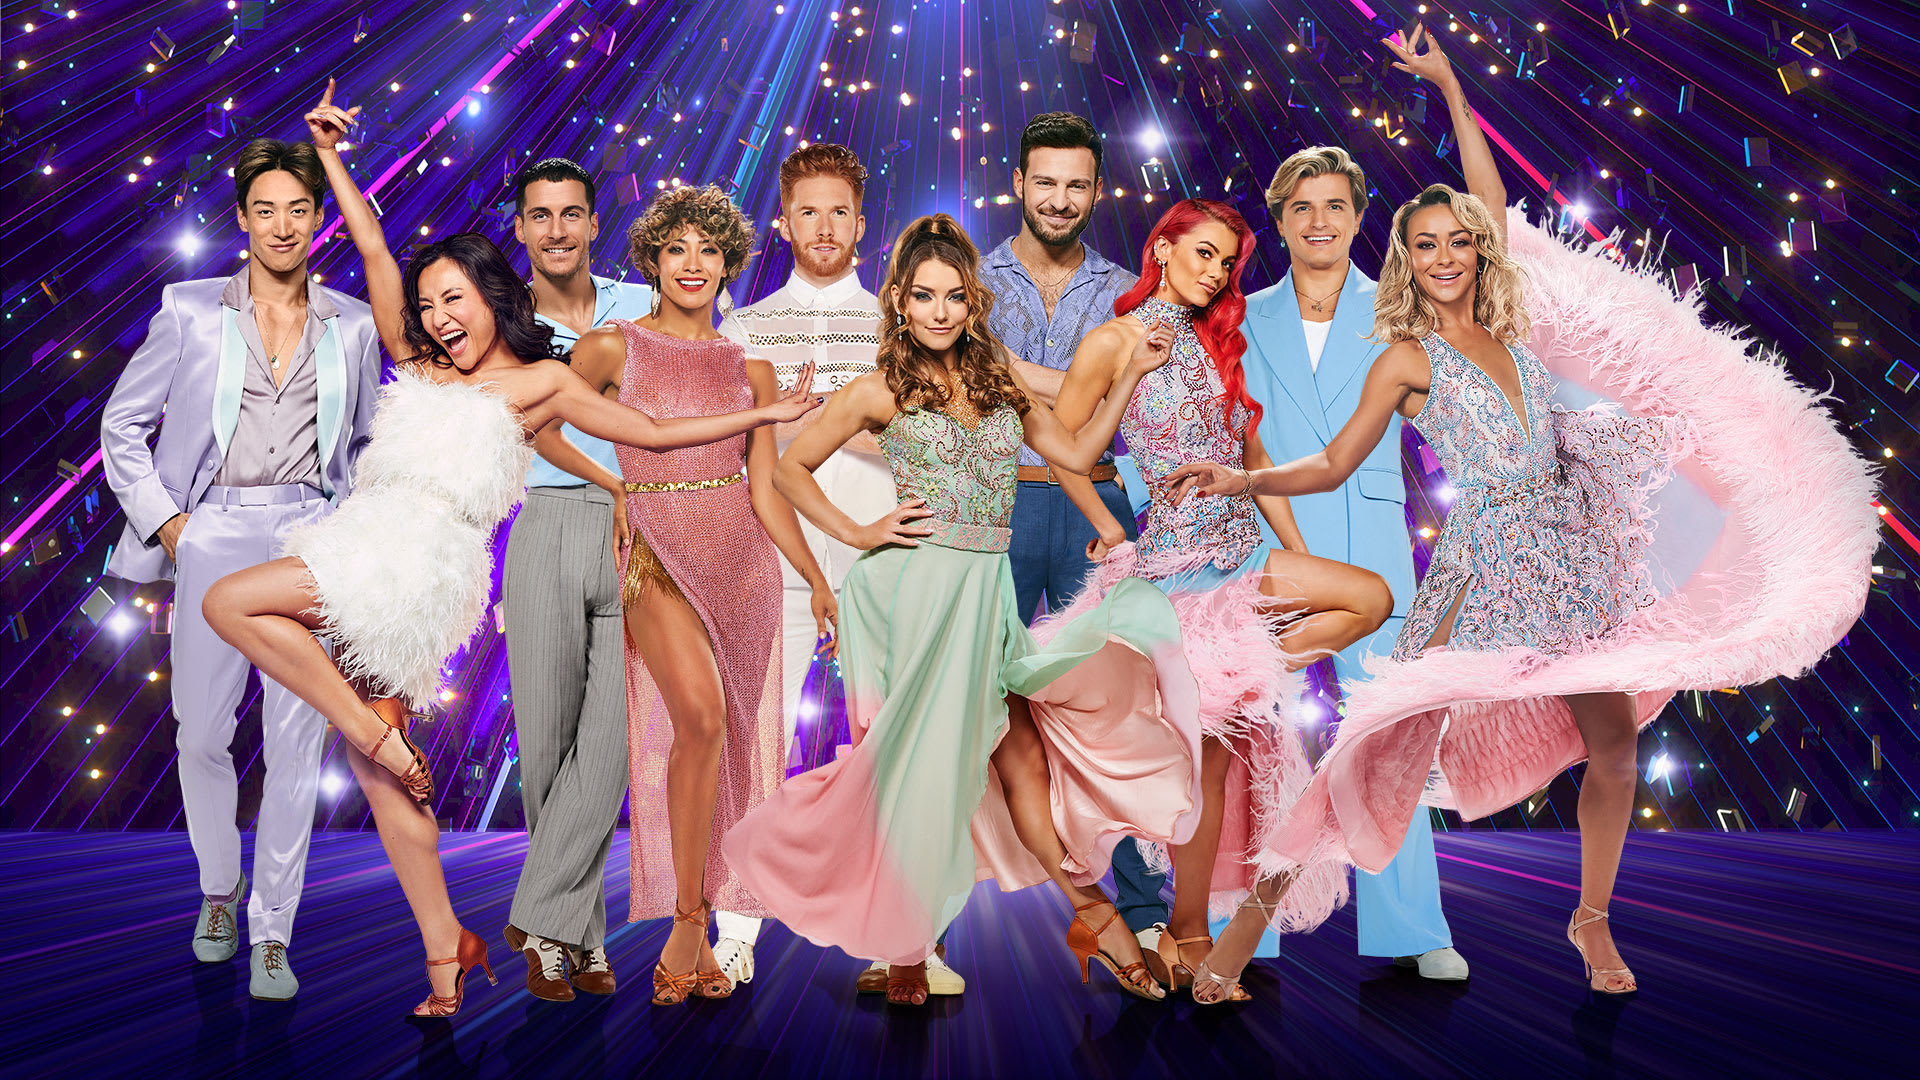 Strictly Come Dancing The Professionals Tickets Dance Shows Tours And Dates Atg Tickets